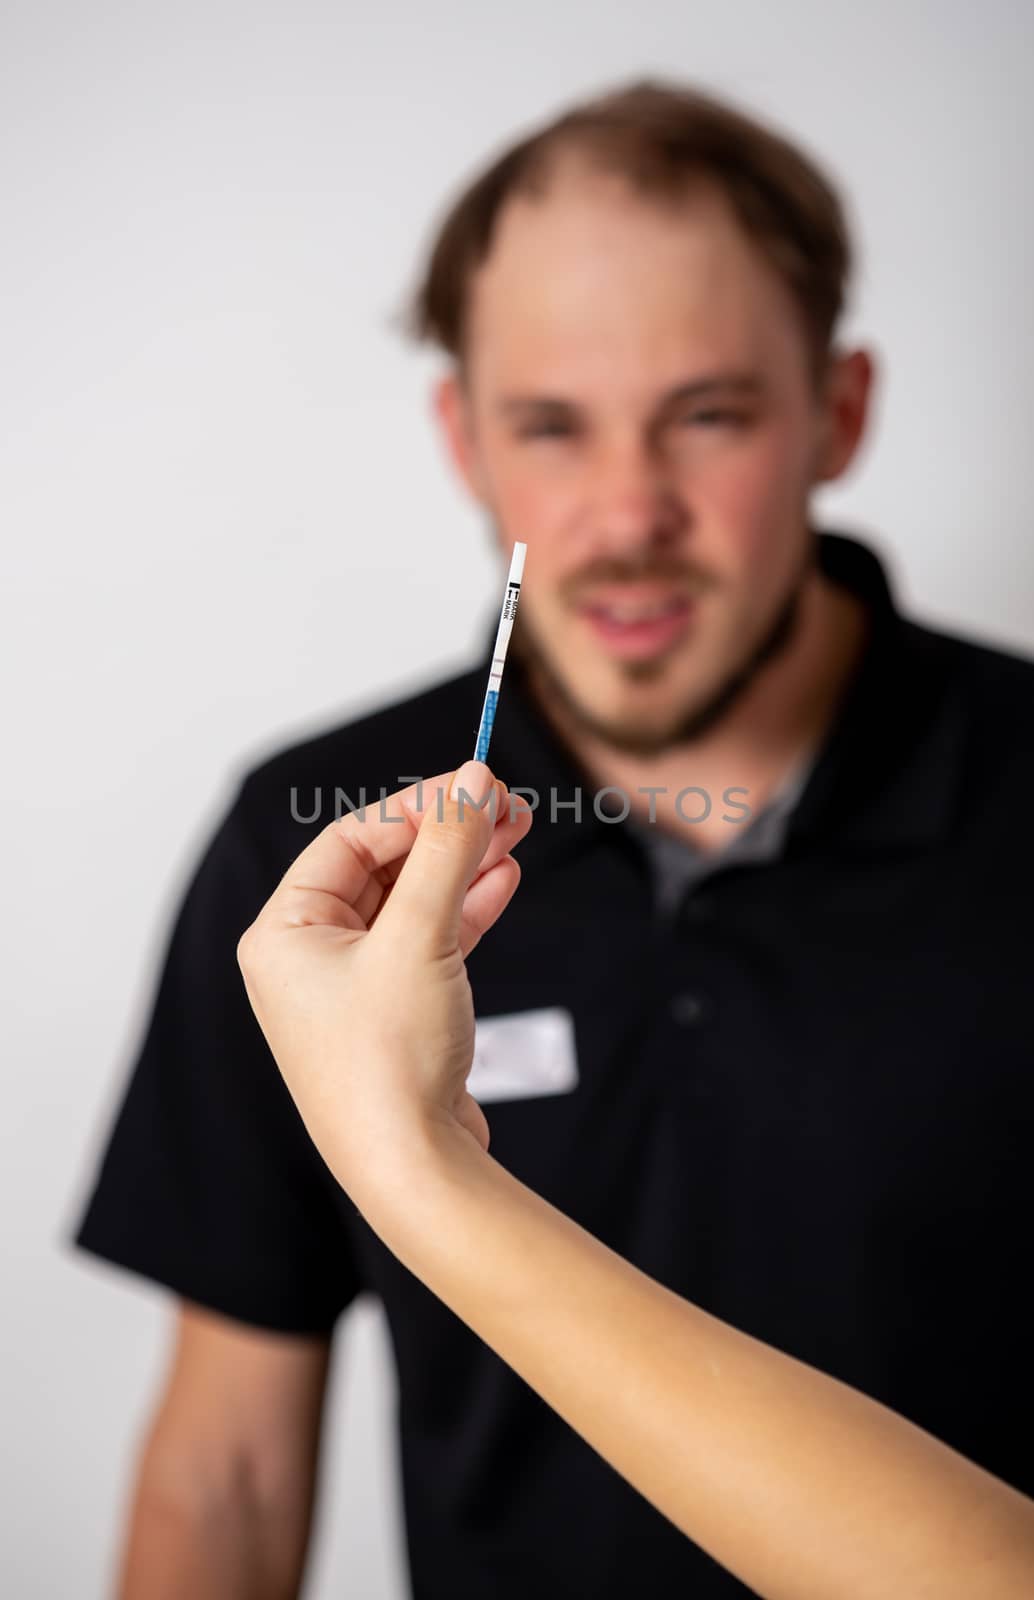 Positive pregnancy test held by a surprised man in the background.